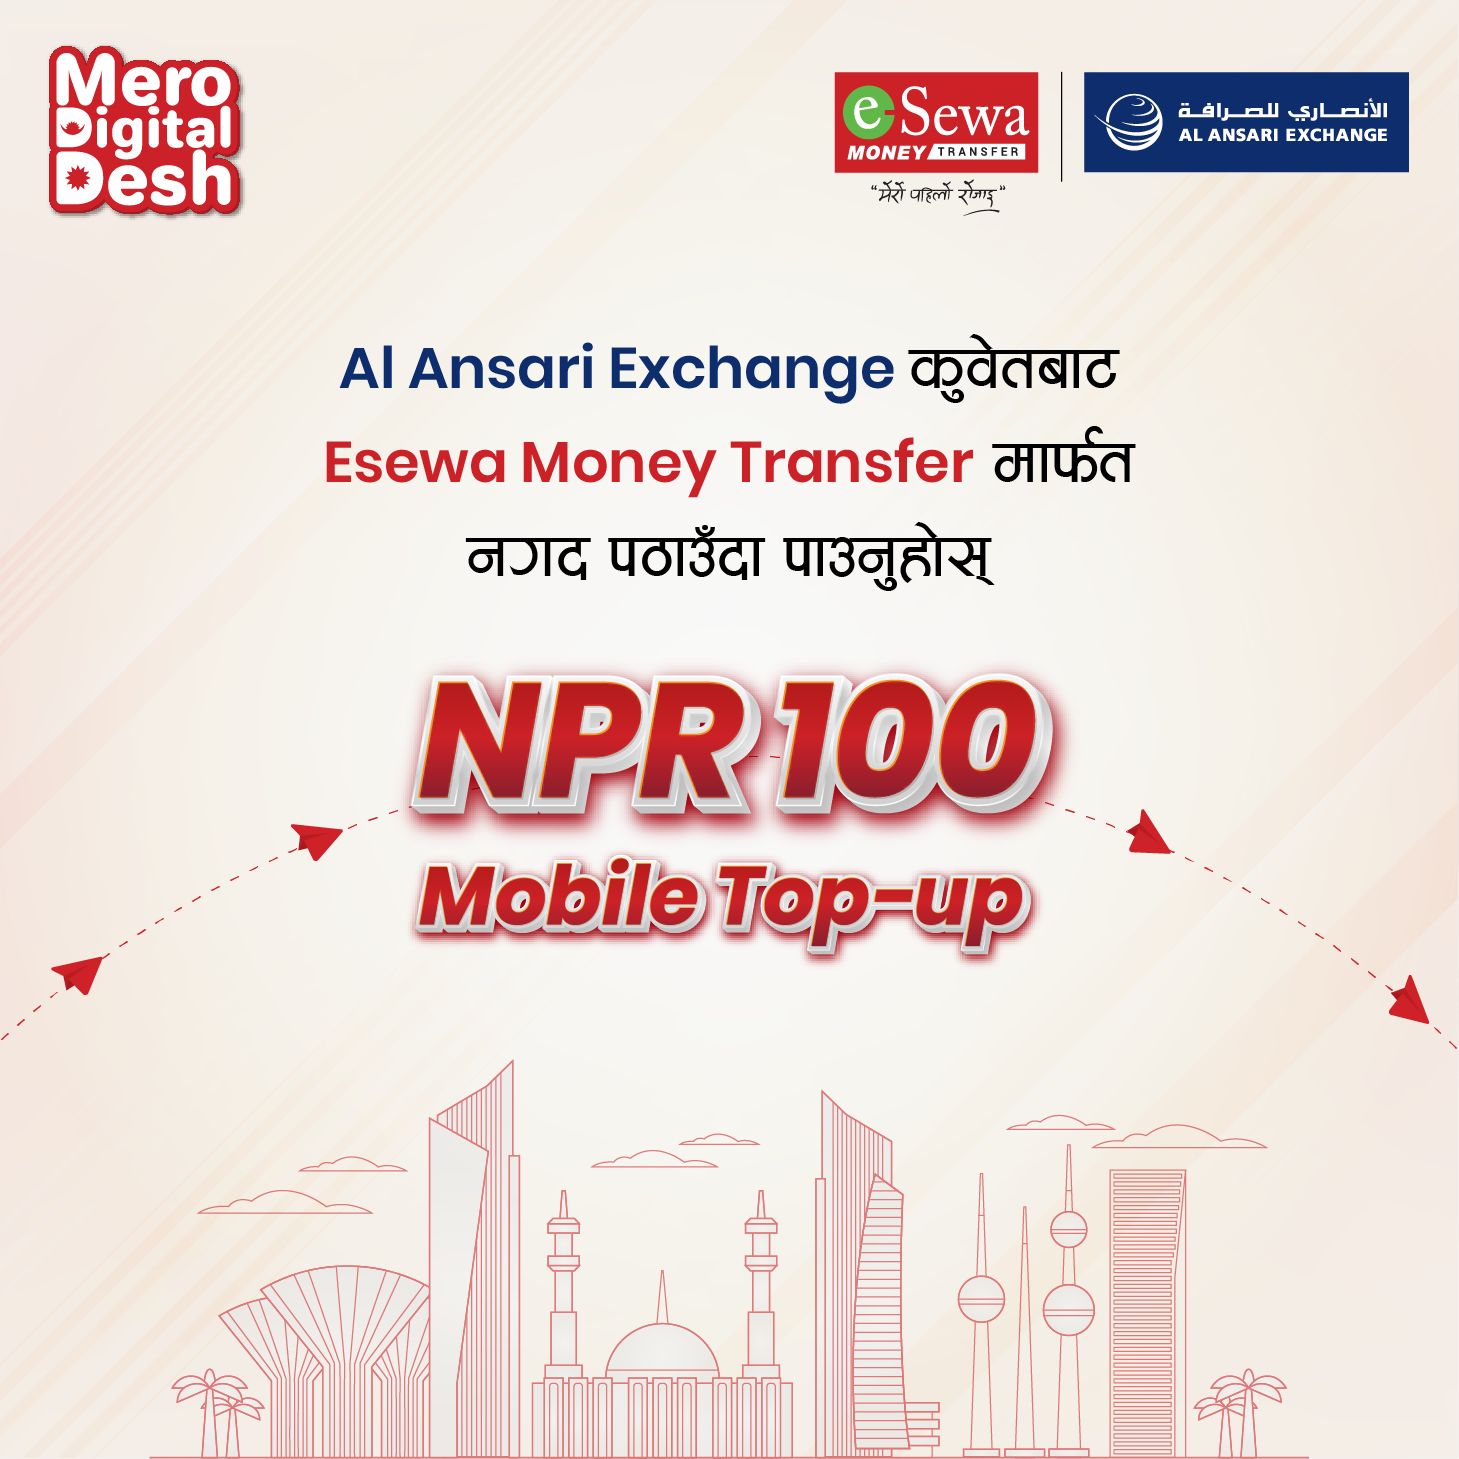 Enjoy Rs. 100 Mobile Top-up with Esewa Money Transfer and Al Ansari Exchange !